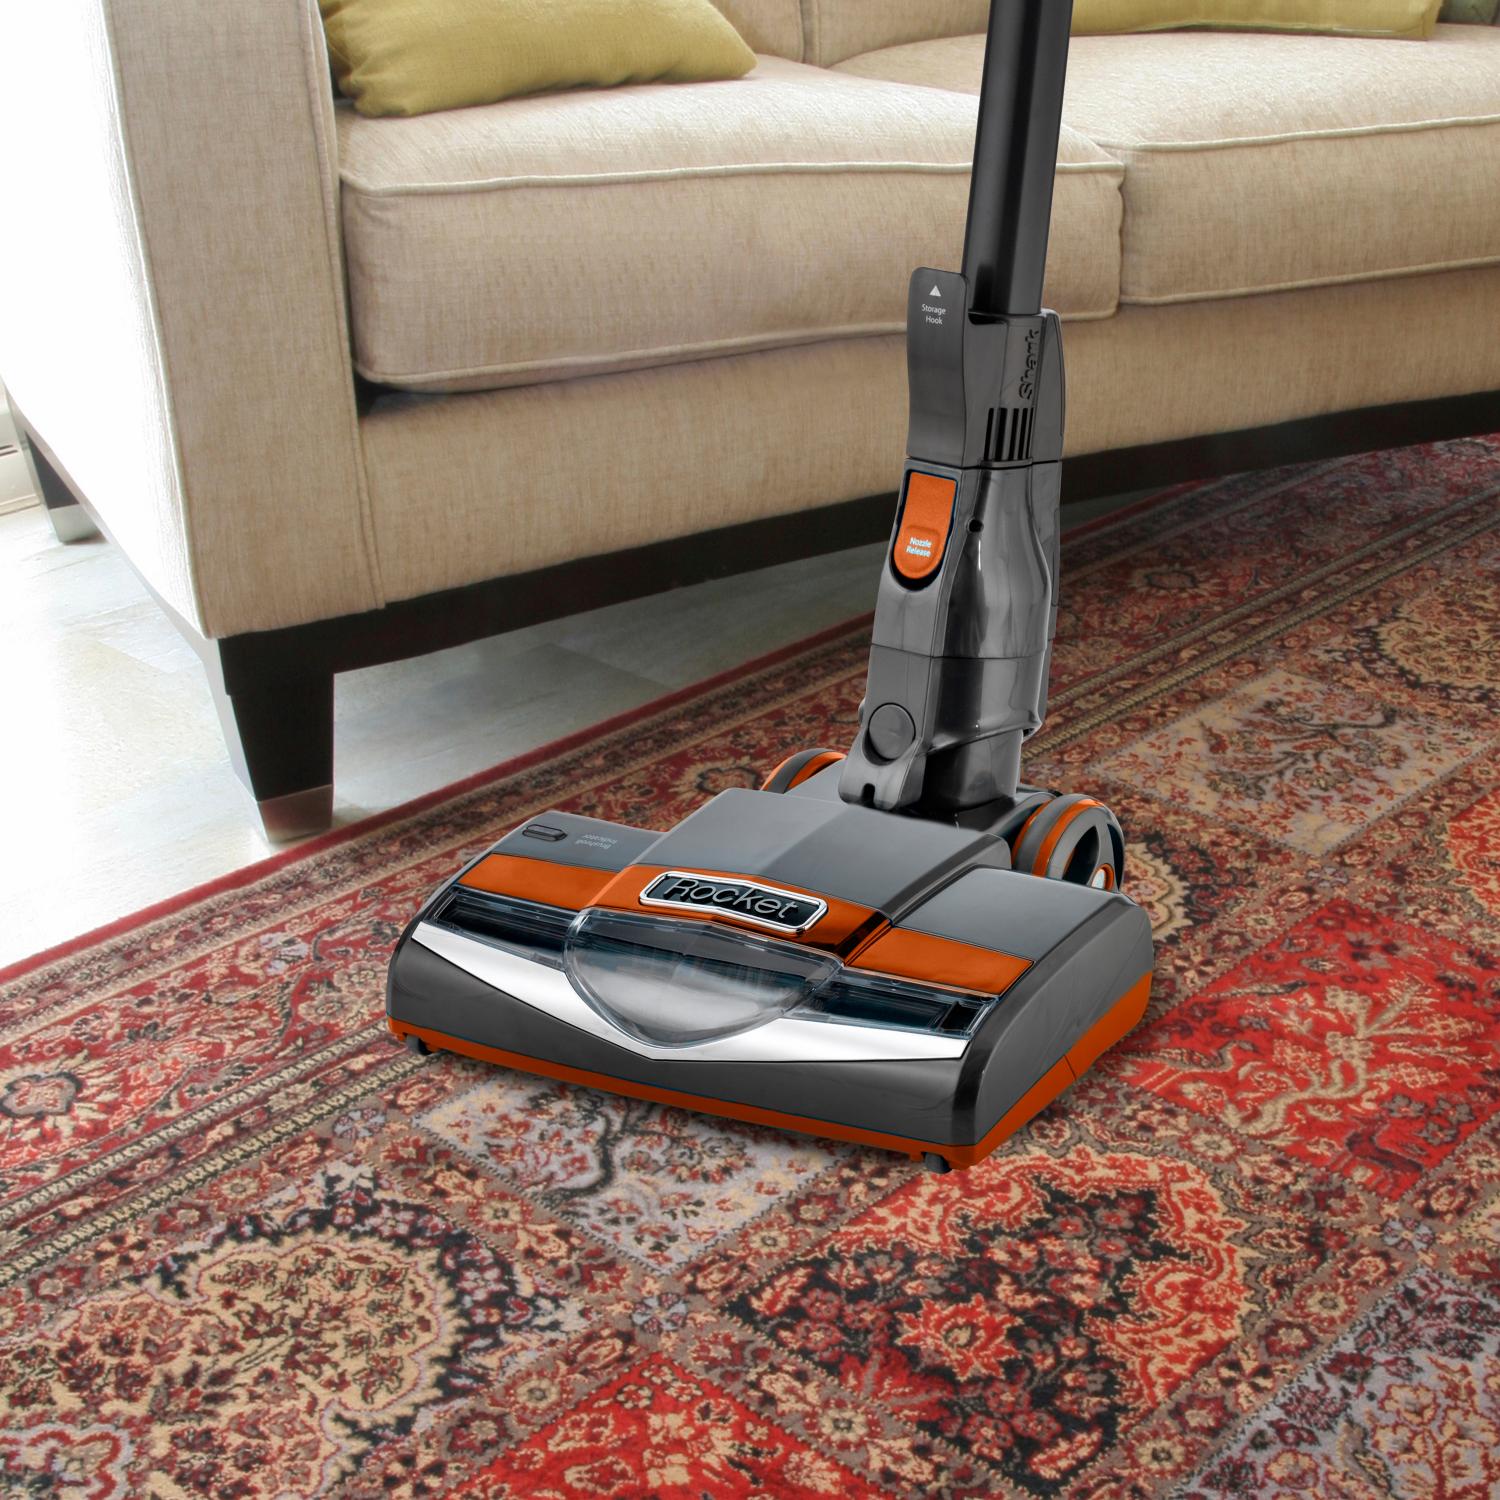 Shark HV302 Rocket Ultra-Light Corded Bagless Vacuum for Carpet and Hard Floor Cleaning with Swivel Steering and Car Detail Set, Gray/Orange (Renewed)